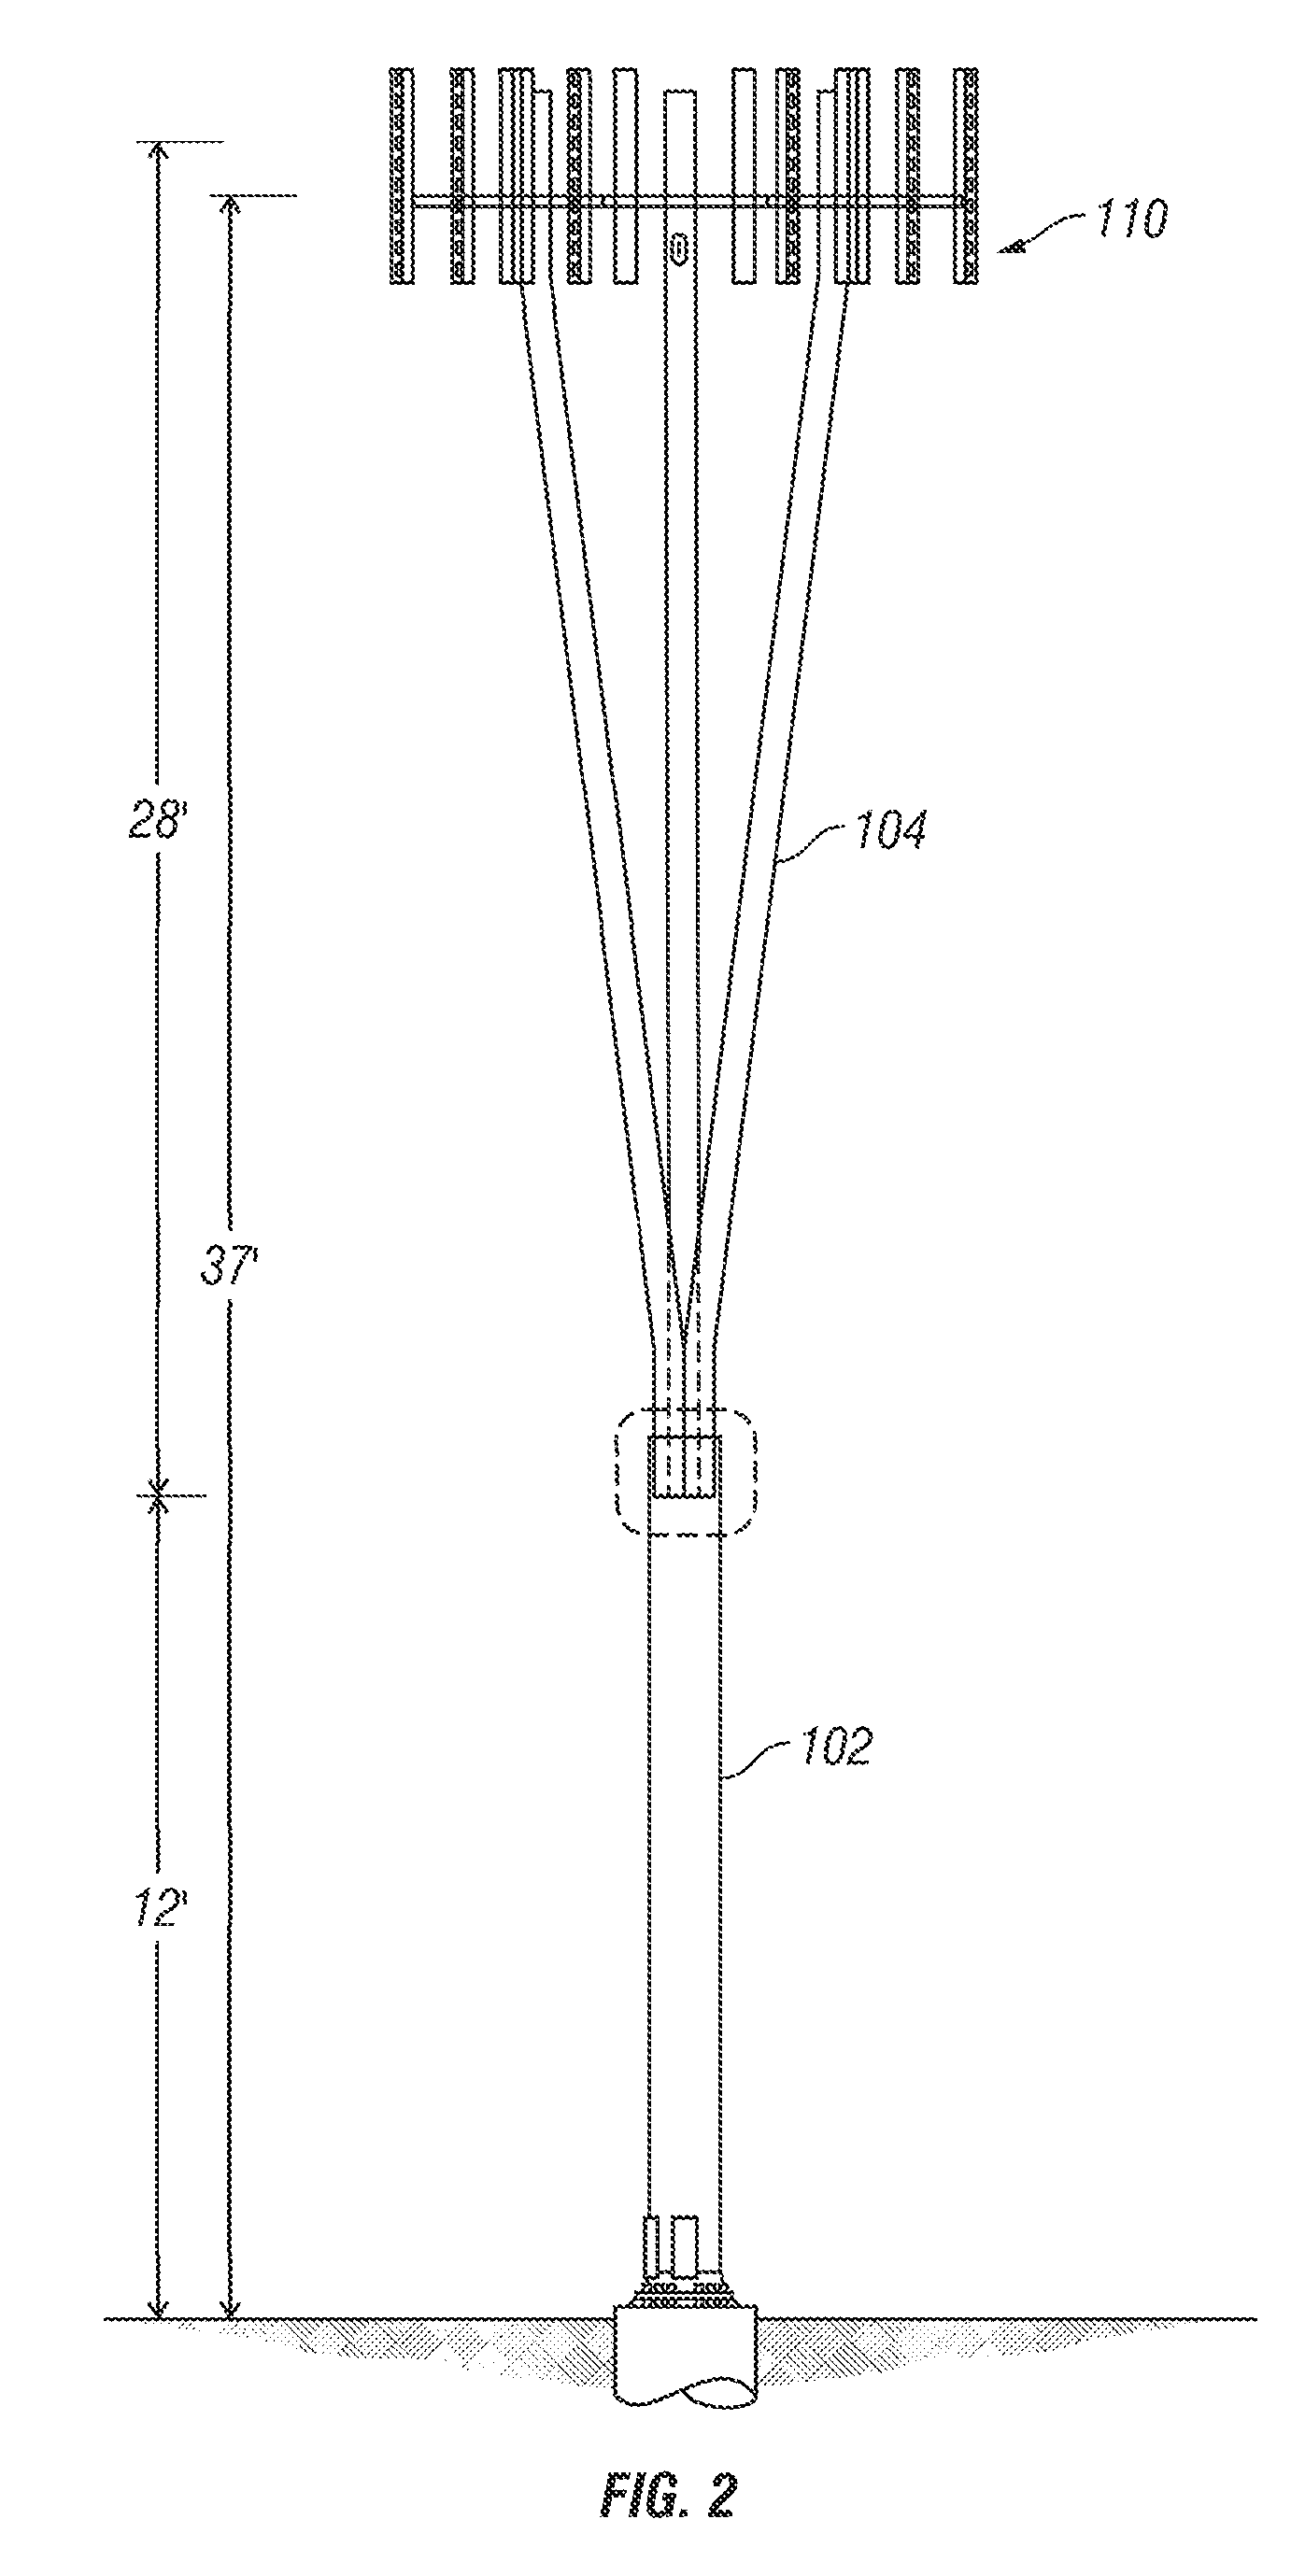 System, Method and Apparatus for Supporting and Concealing Radio Antennas